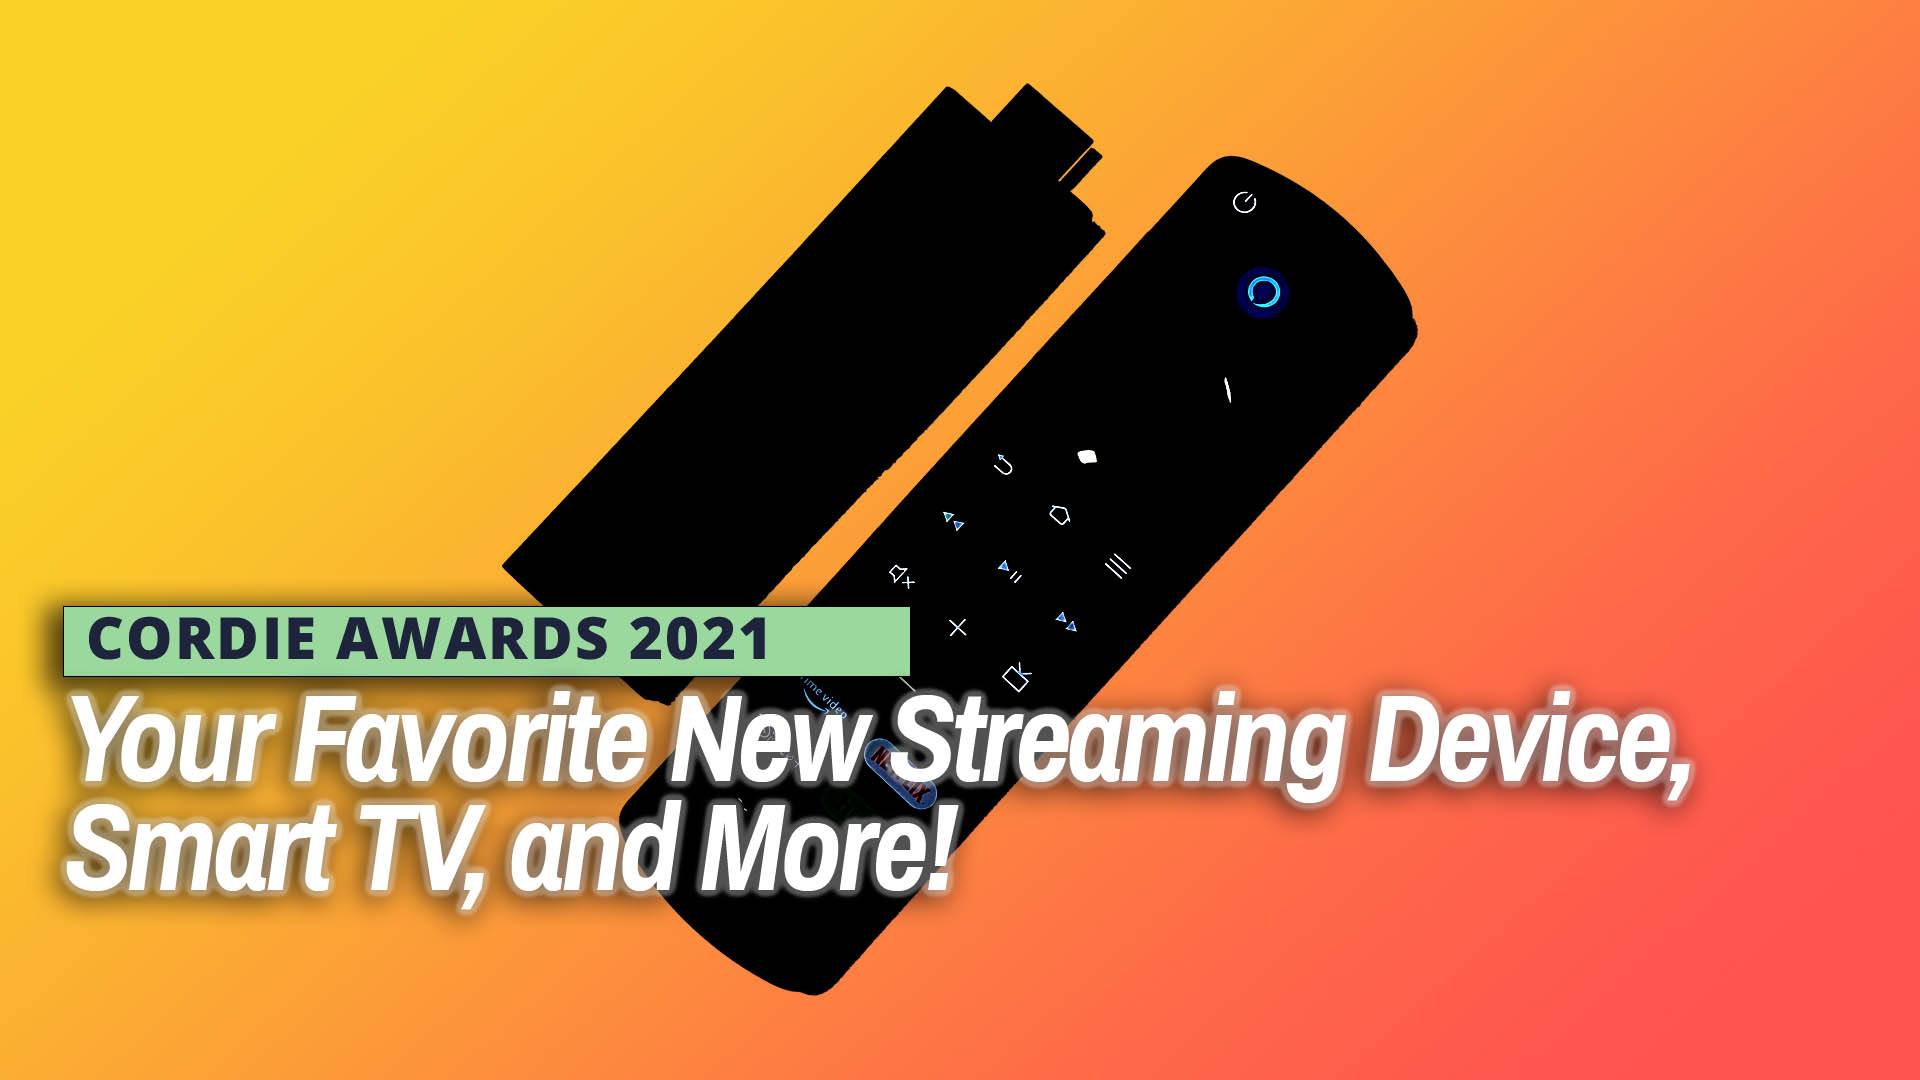 Video: The Cordie Awards for the Best New Streaming Device of 2021 and More